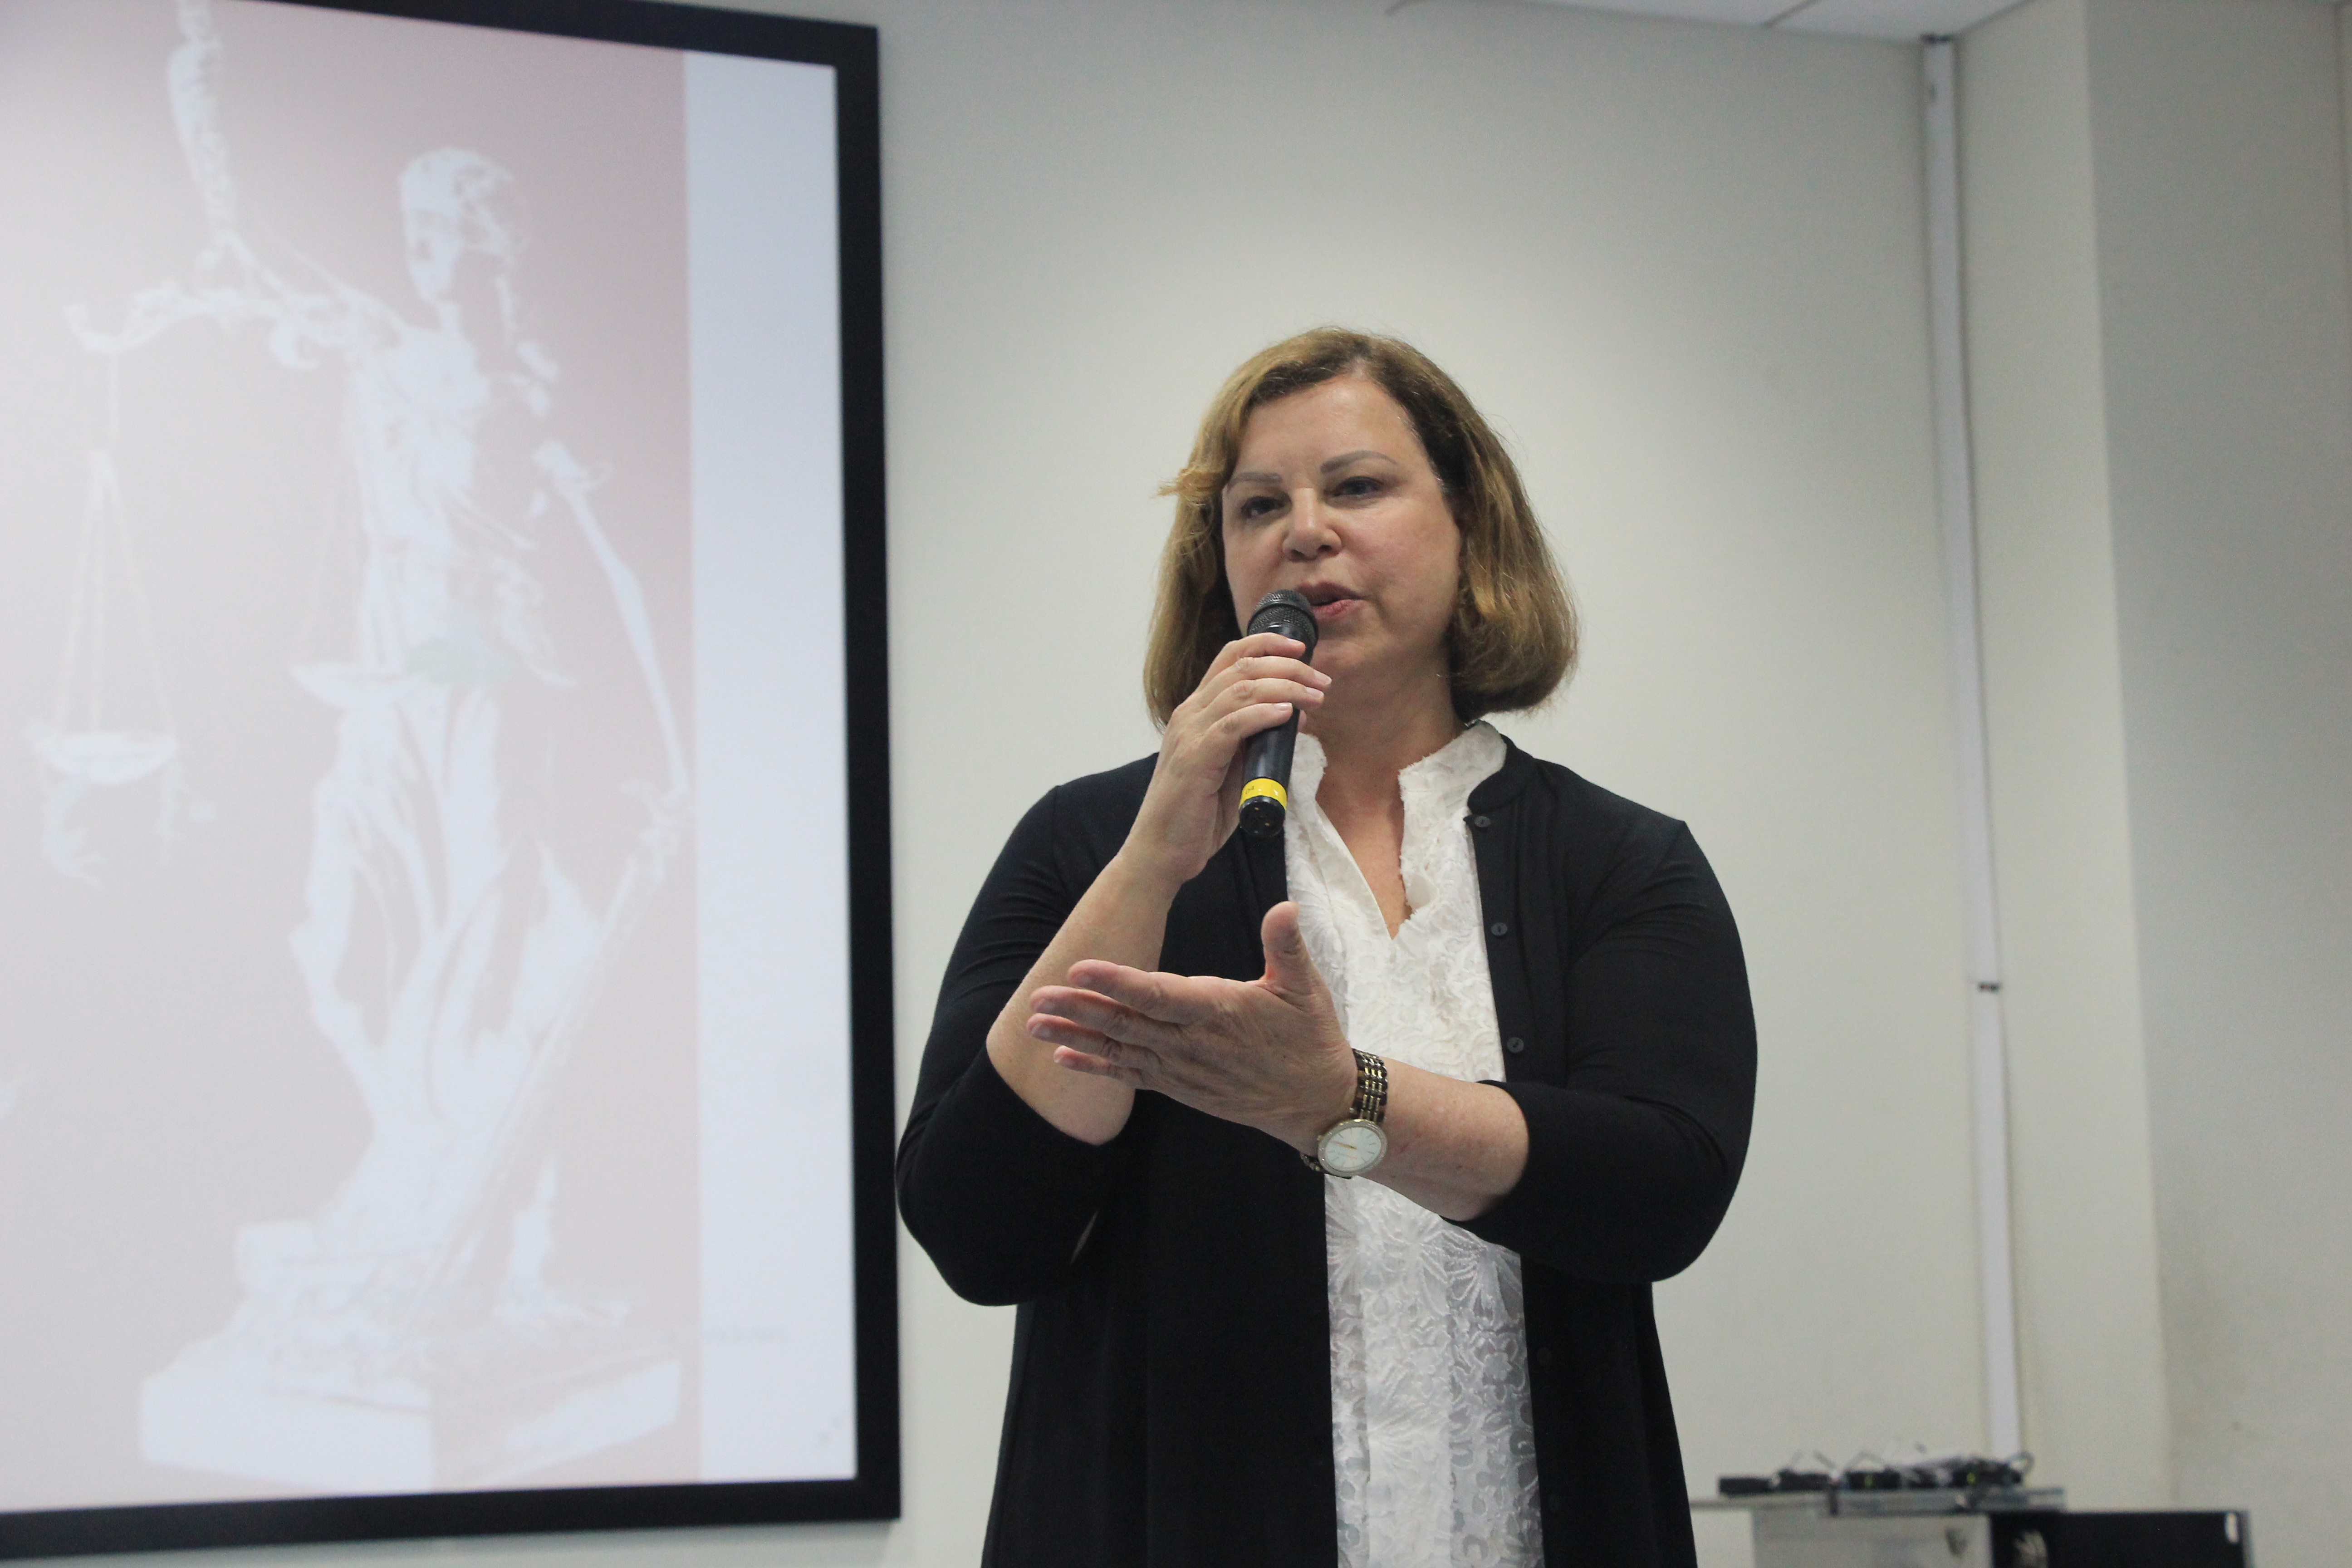 Attorney and filmmaker Sharon Rowen talks with students at the screening of her film Balancing the Scales at Hoa Sen University on May 13, 2019 in Ho Chi Minh City. Photo: Dong Nguyen/ Tuoi Tre News